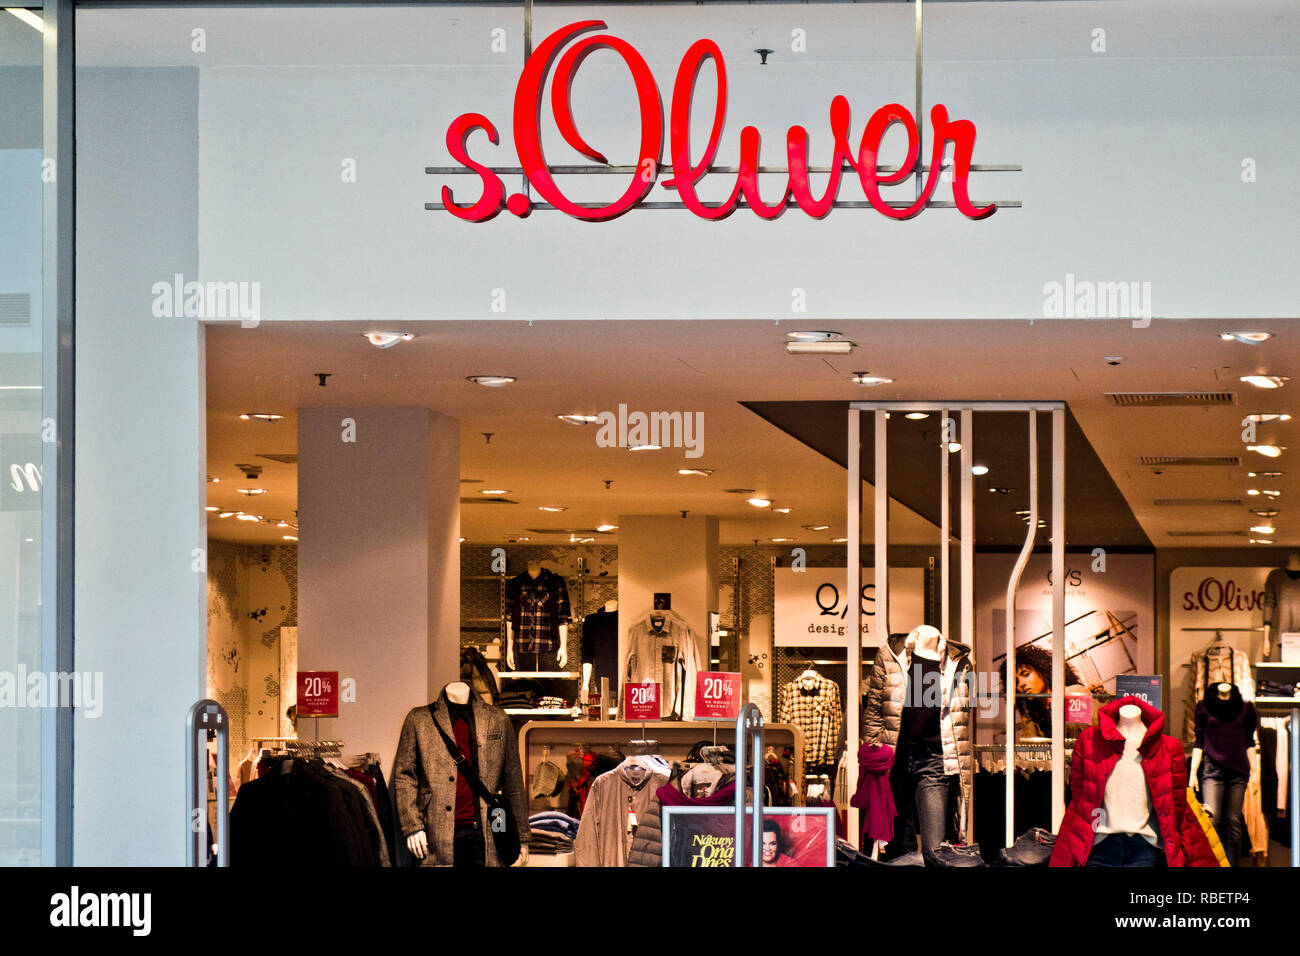 entrance of a s.Oliver shop Stock Photo